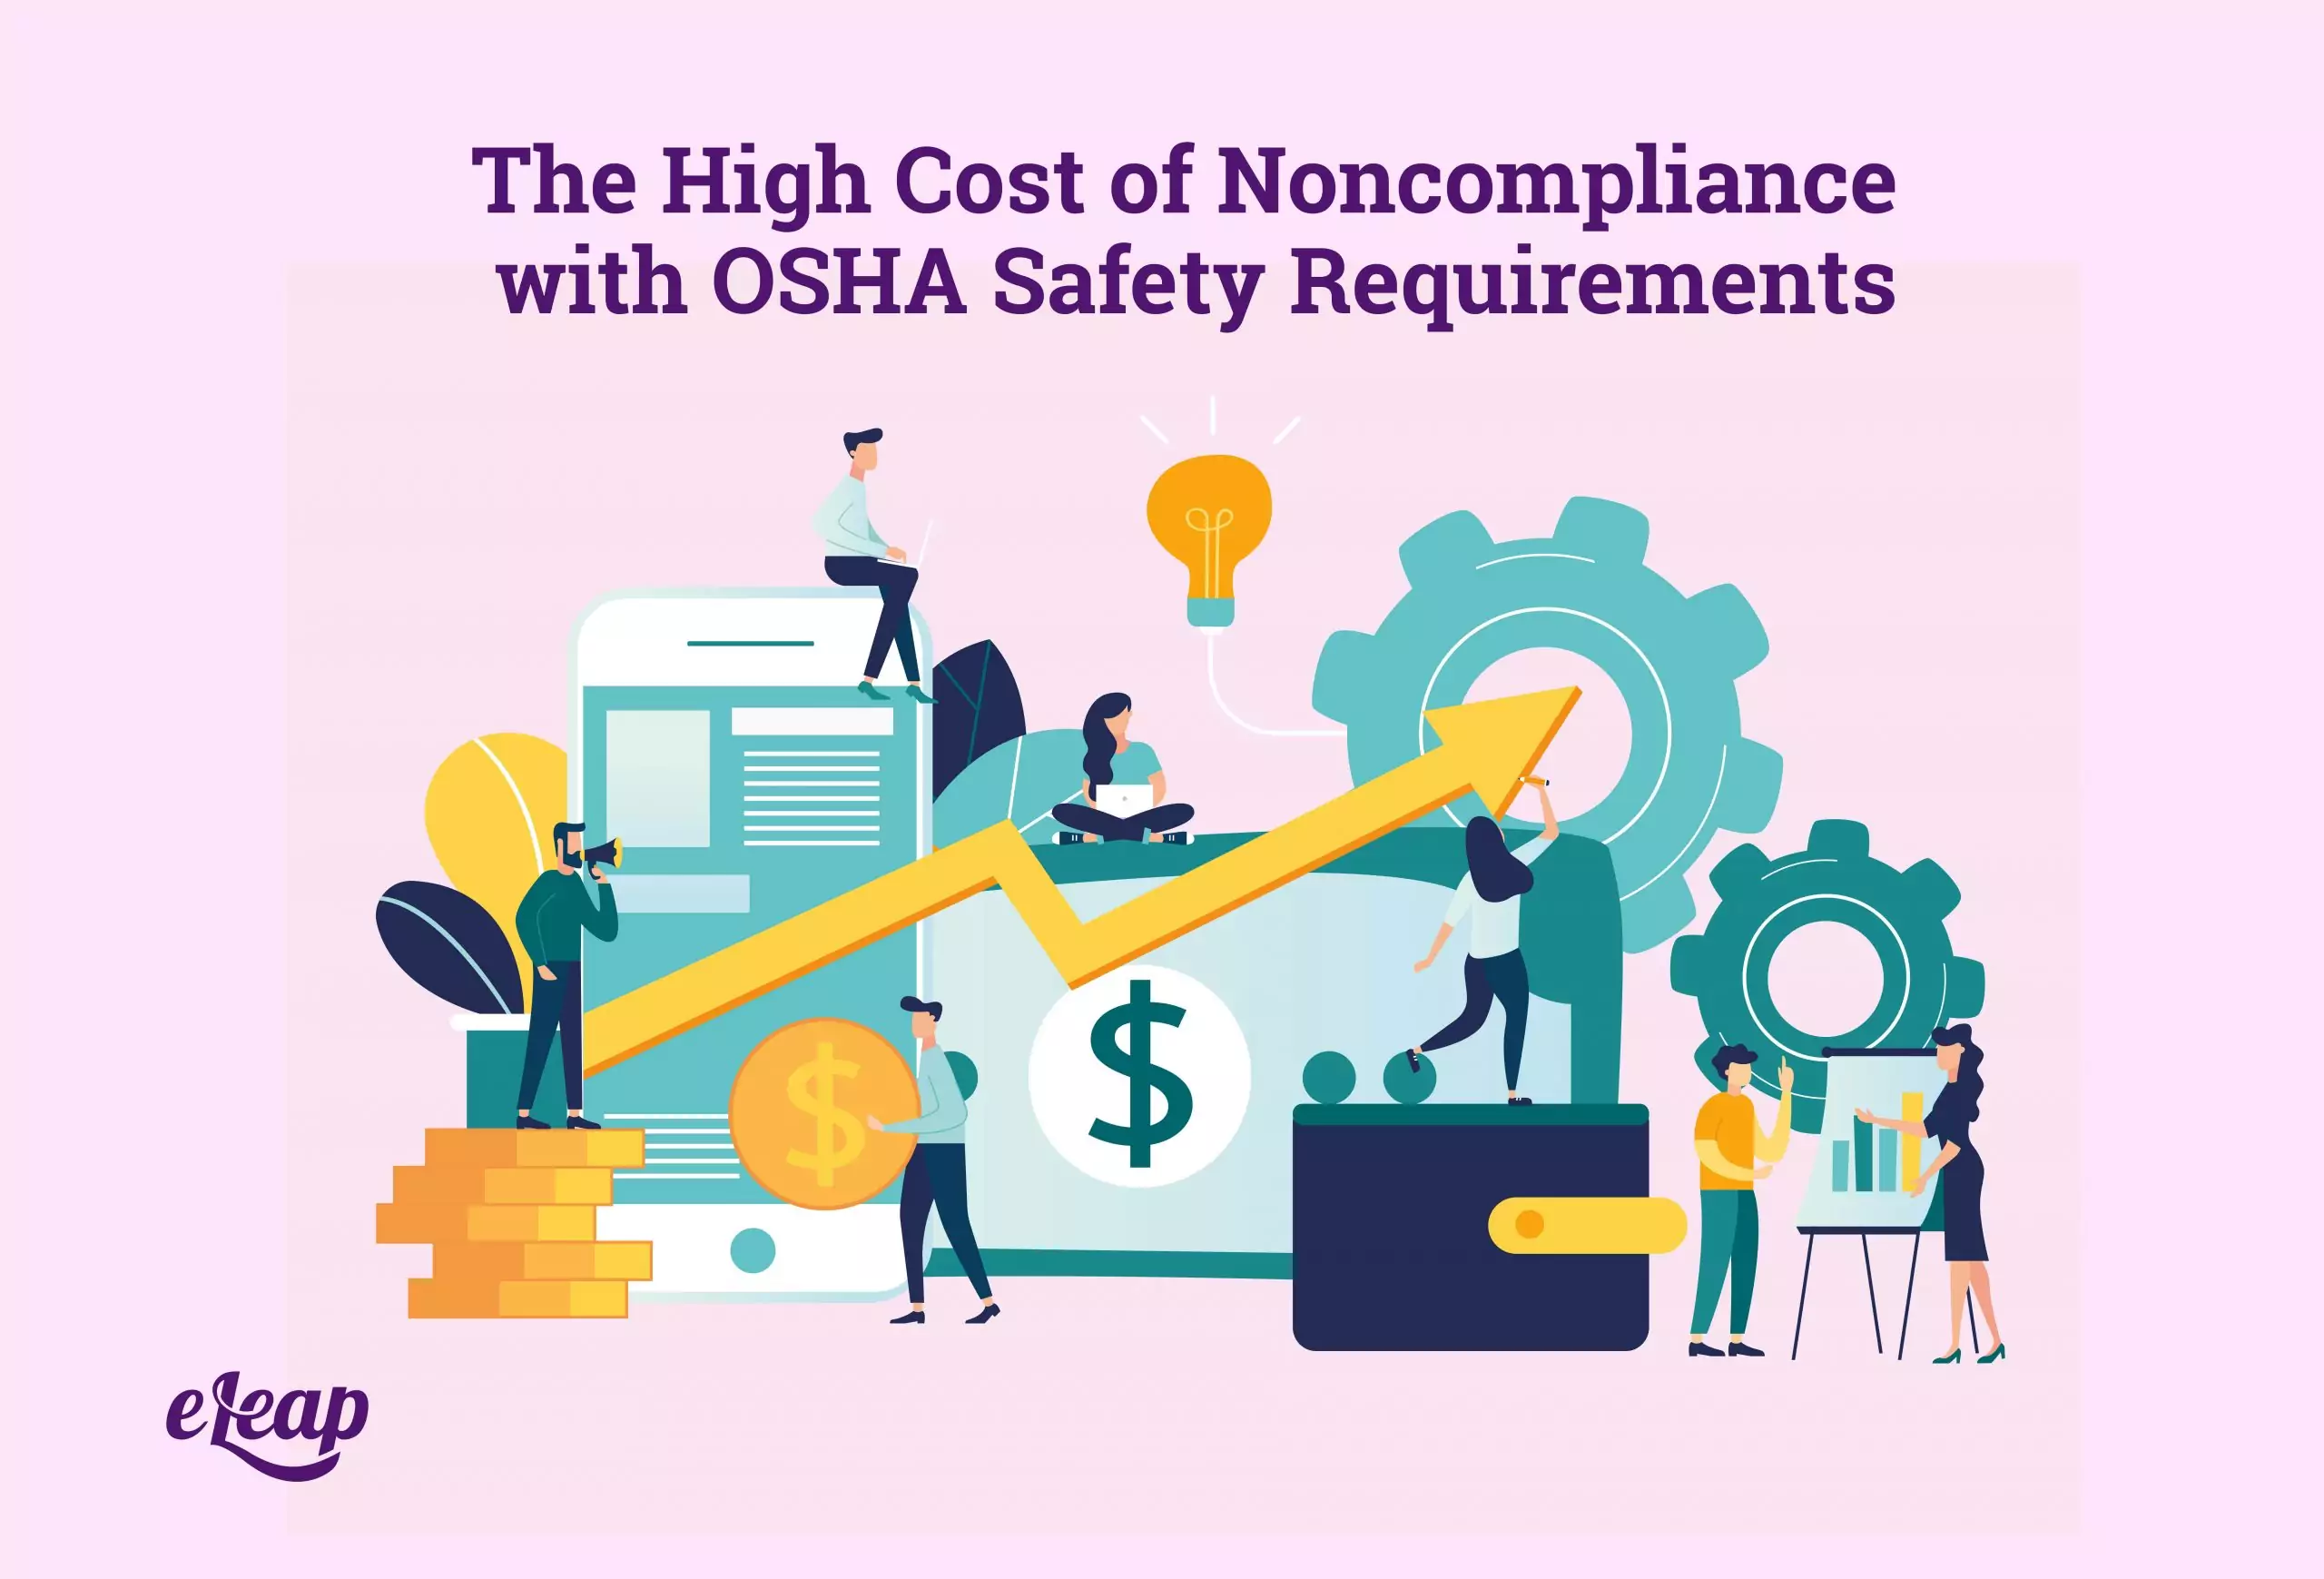 The High Cost of Noncompliance with OSHA Safety Requirements